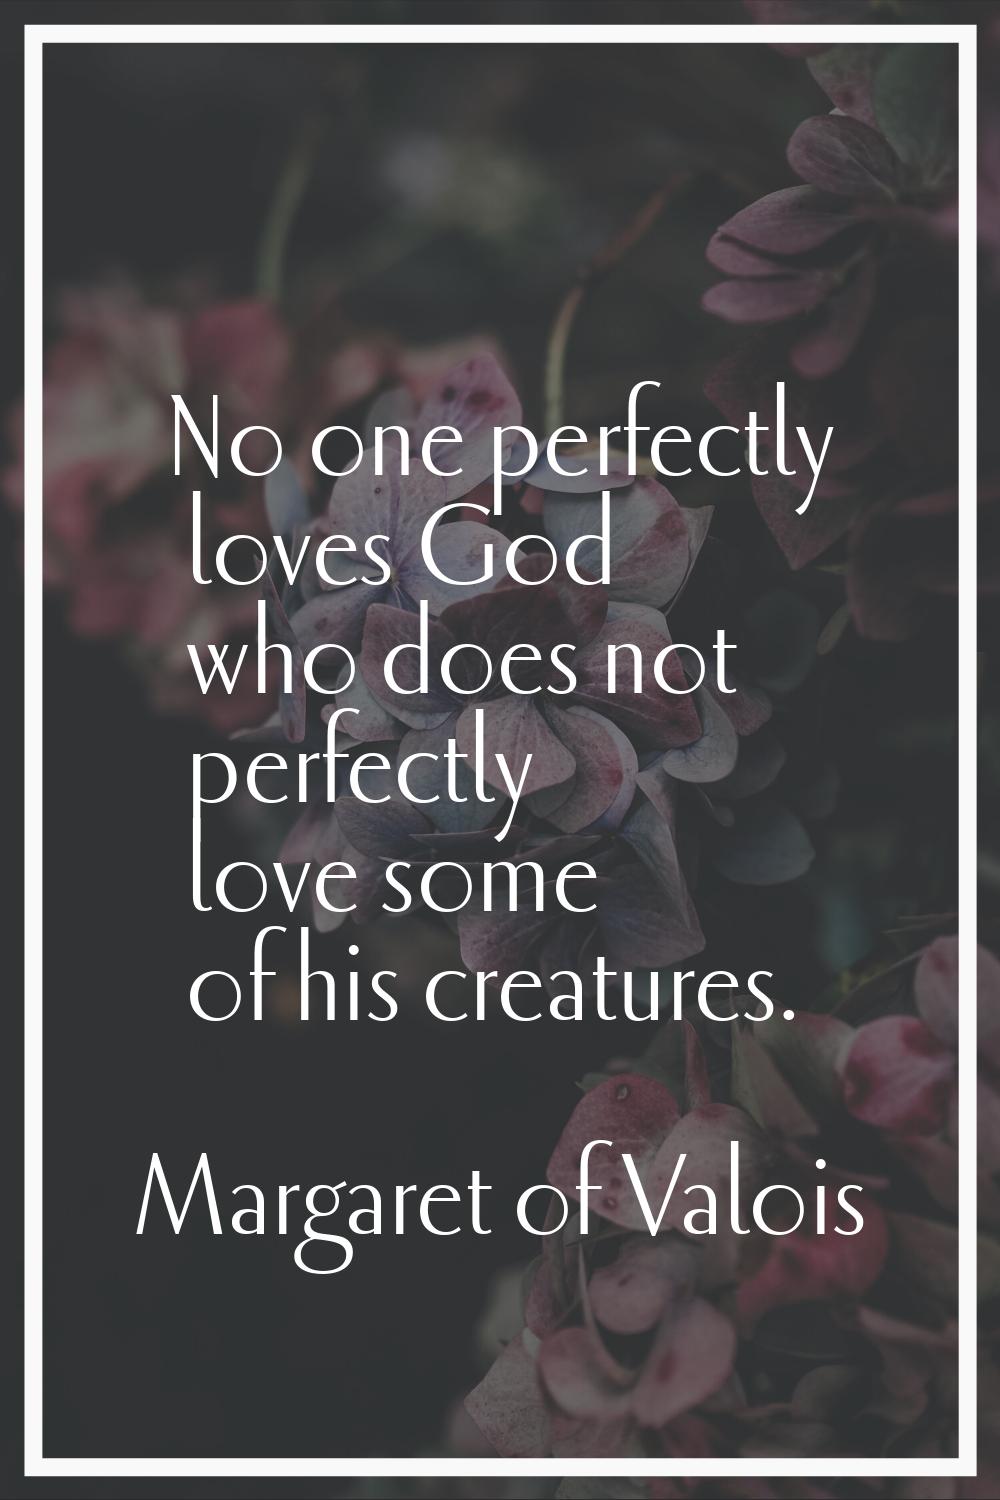 No one perfectly loves God who does not perfectly love some of his creatures.